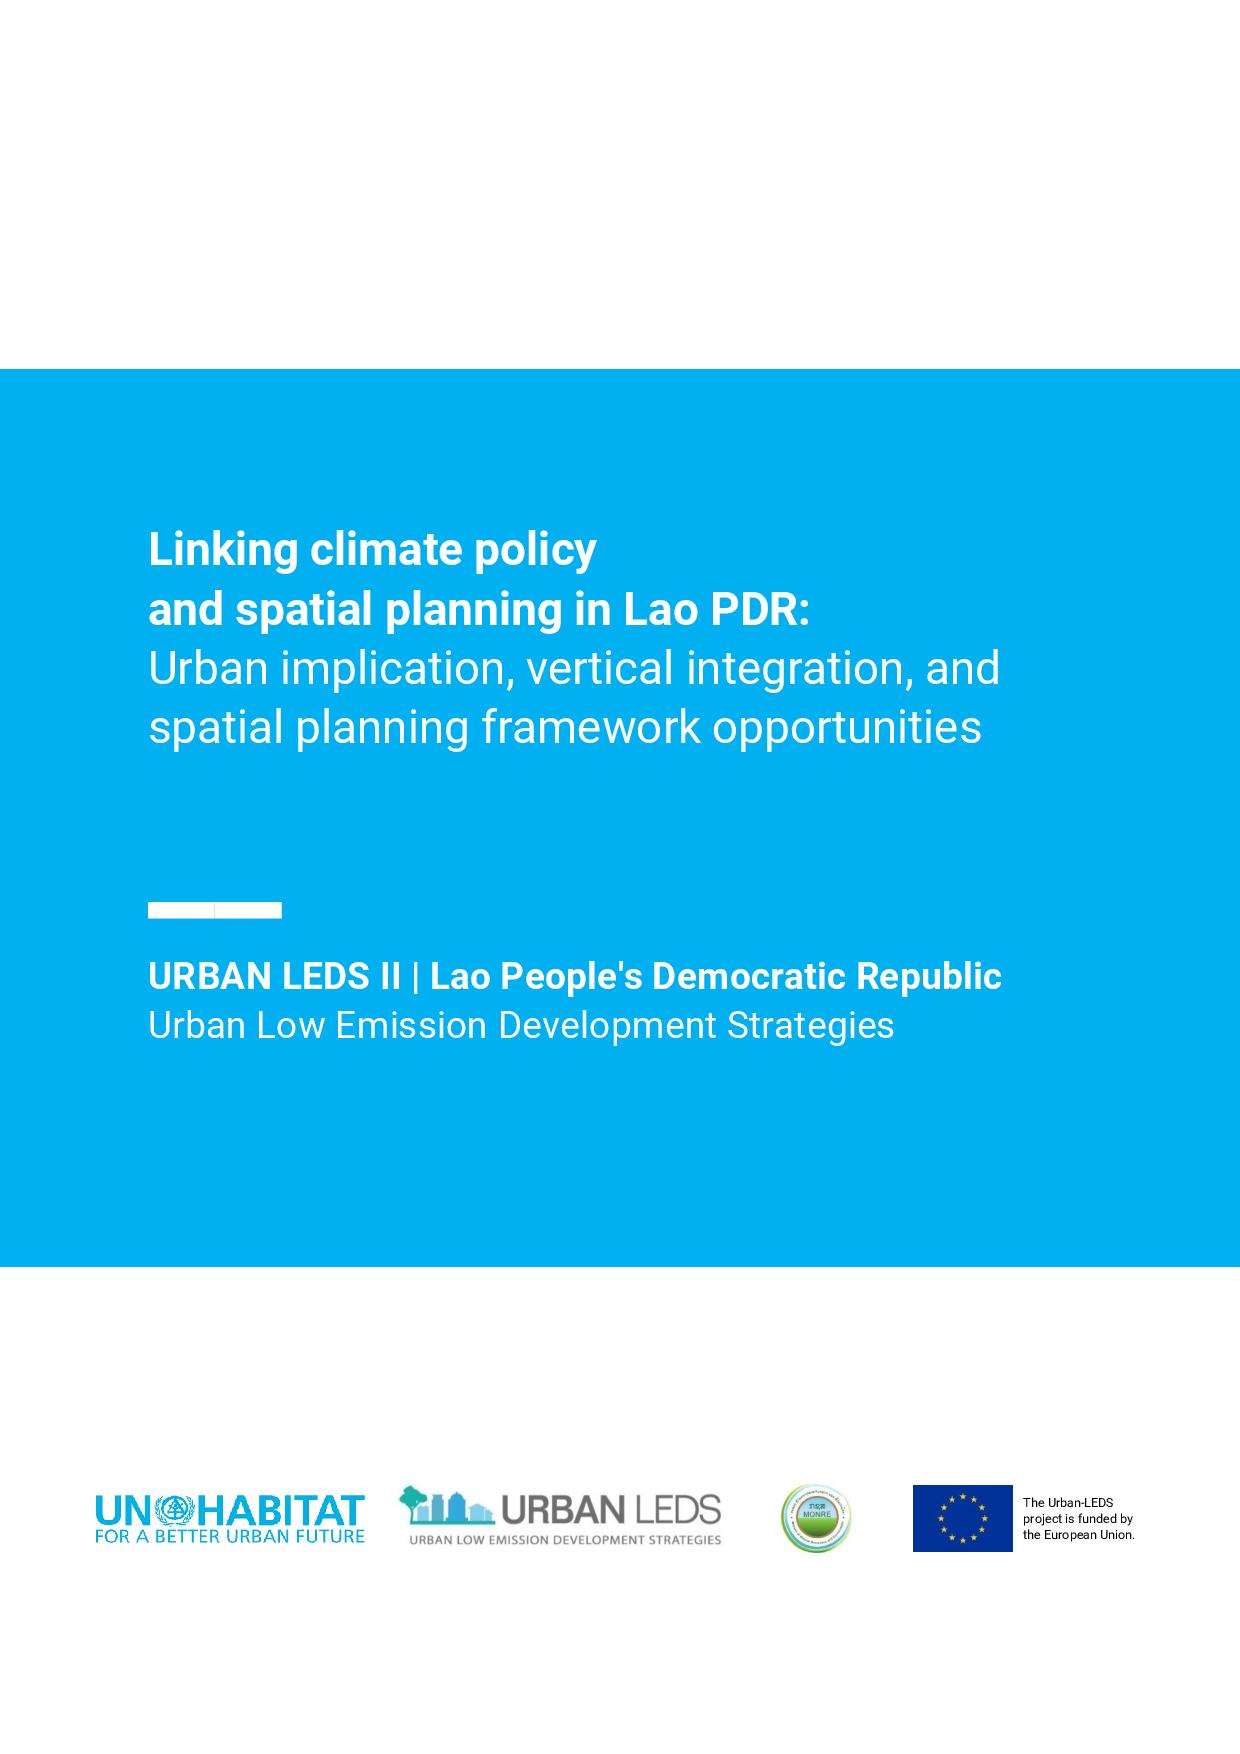 Linking climate policy and spatial planning in Lao PDR: Urban implication, vertical integration, and spatial planning framework opportunities (2022)